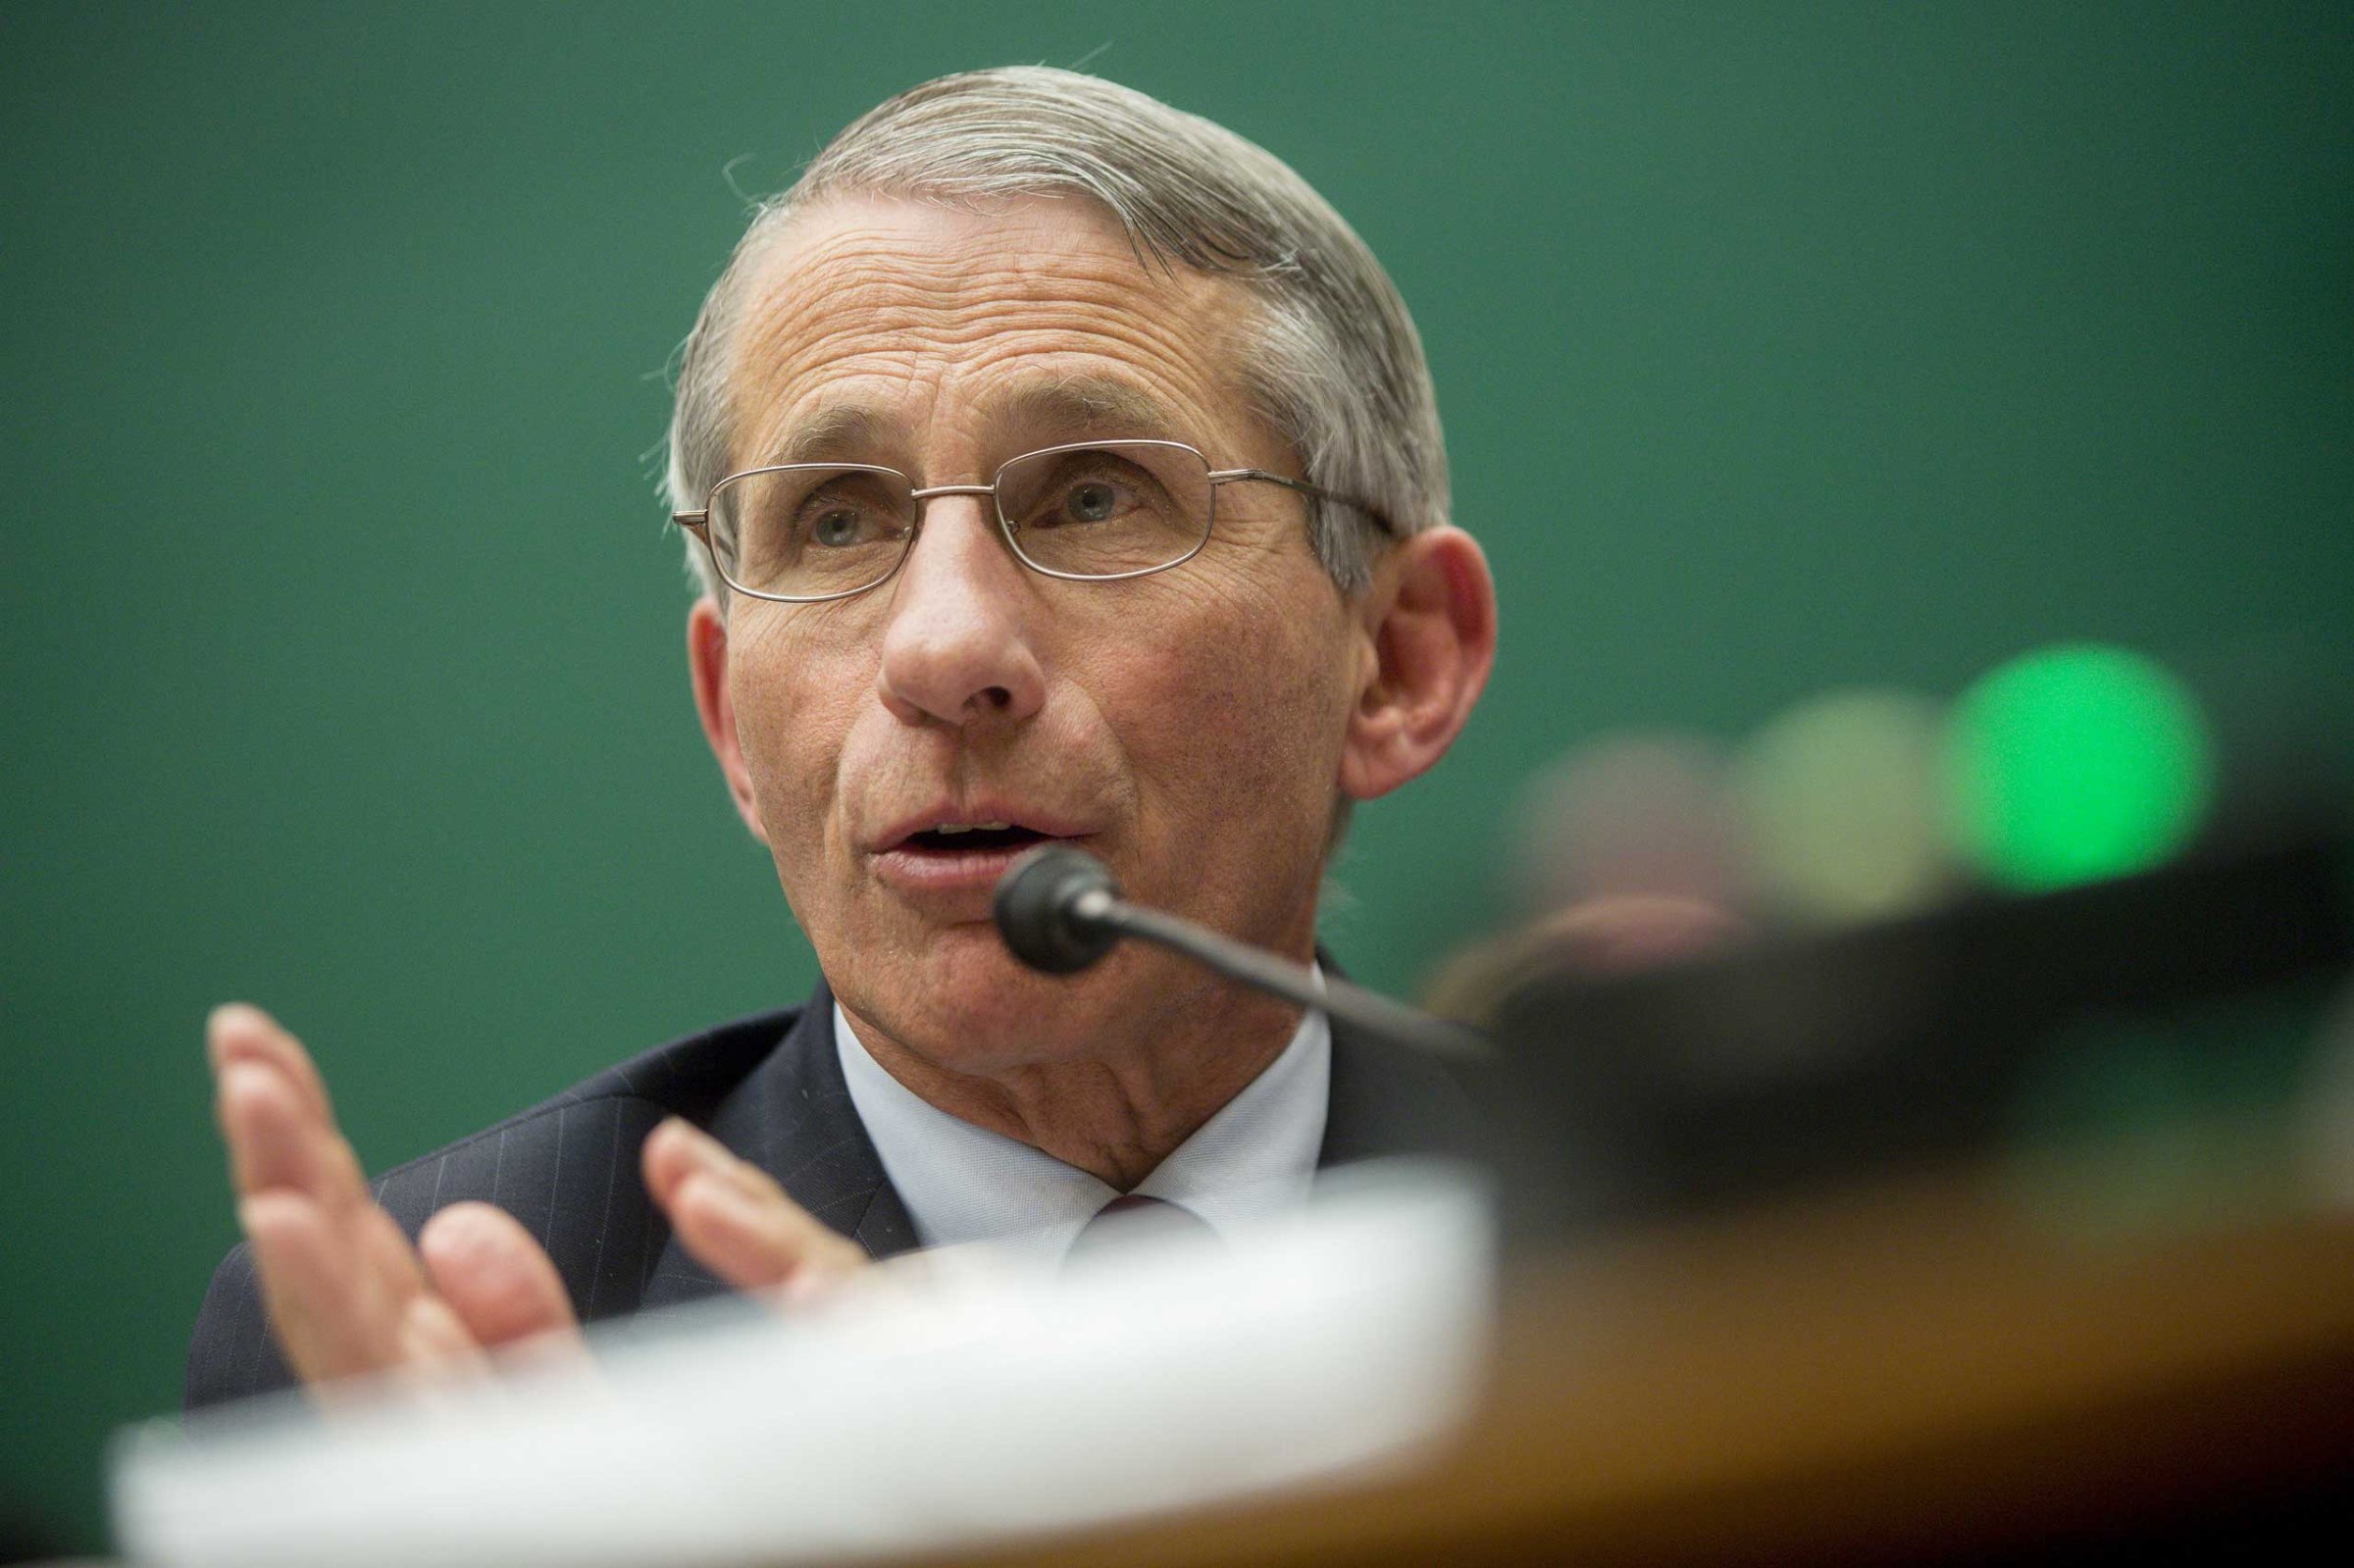 Anthony Fauci, director of the National Institute of Allergy and Infectious Diseases, speaks during a House Energy and Commerce Committee subcommittee hearing on the U.S. public health response to the Ebola outbreak in Washington, D.C., Oct. 2014.